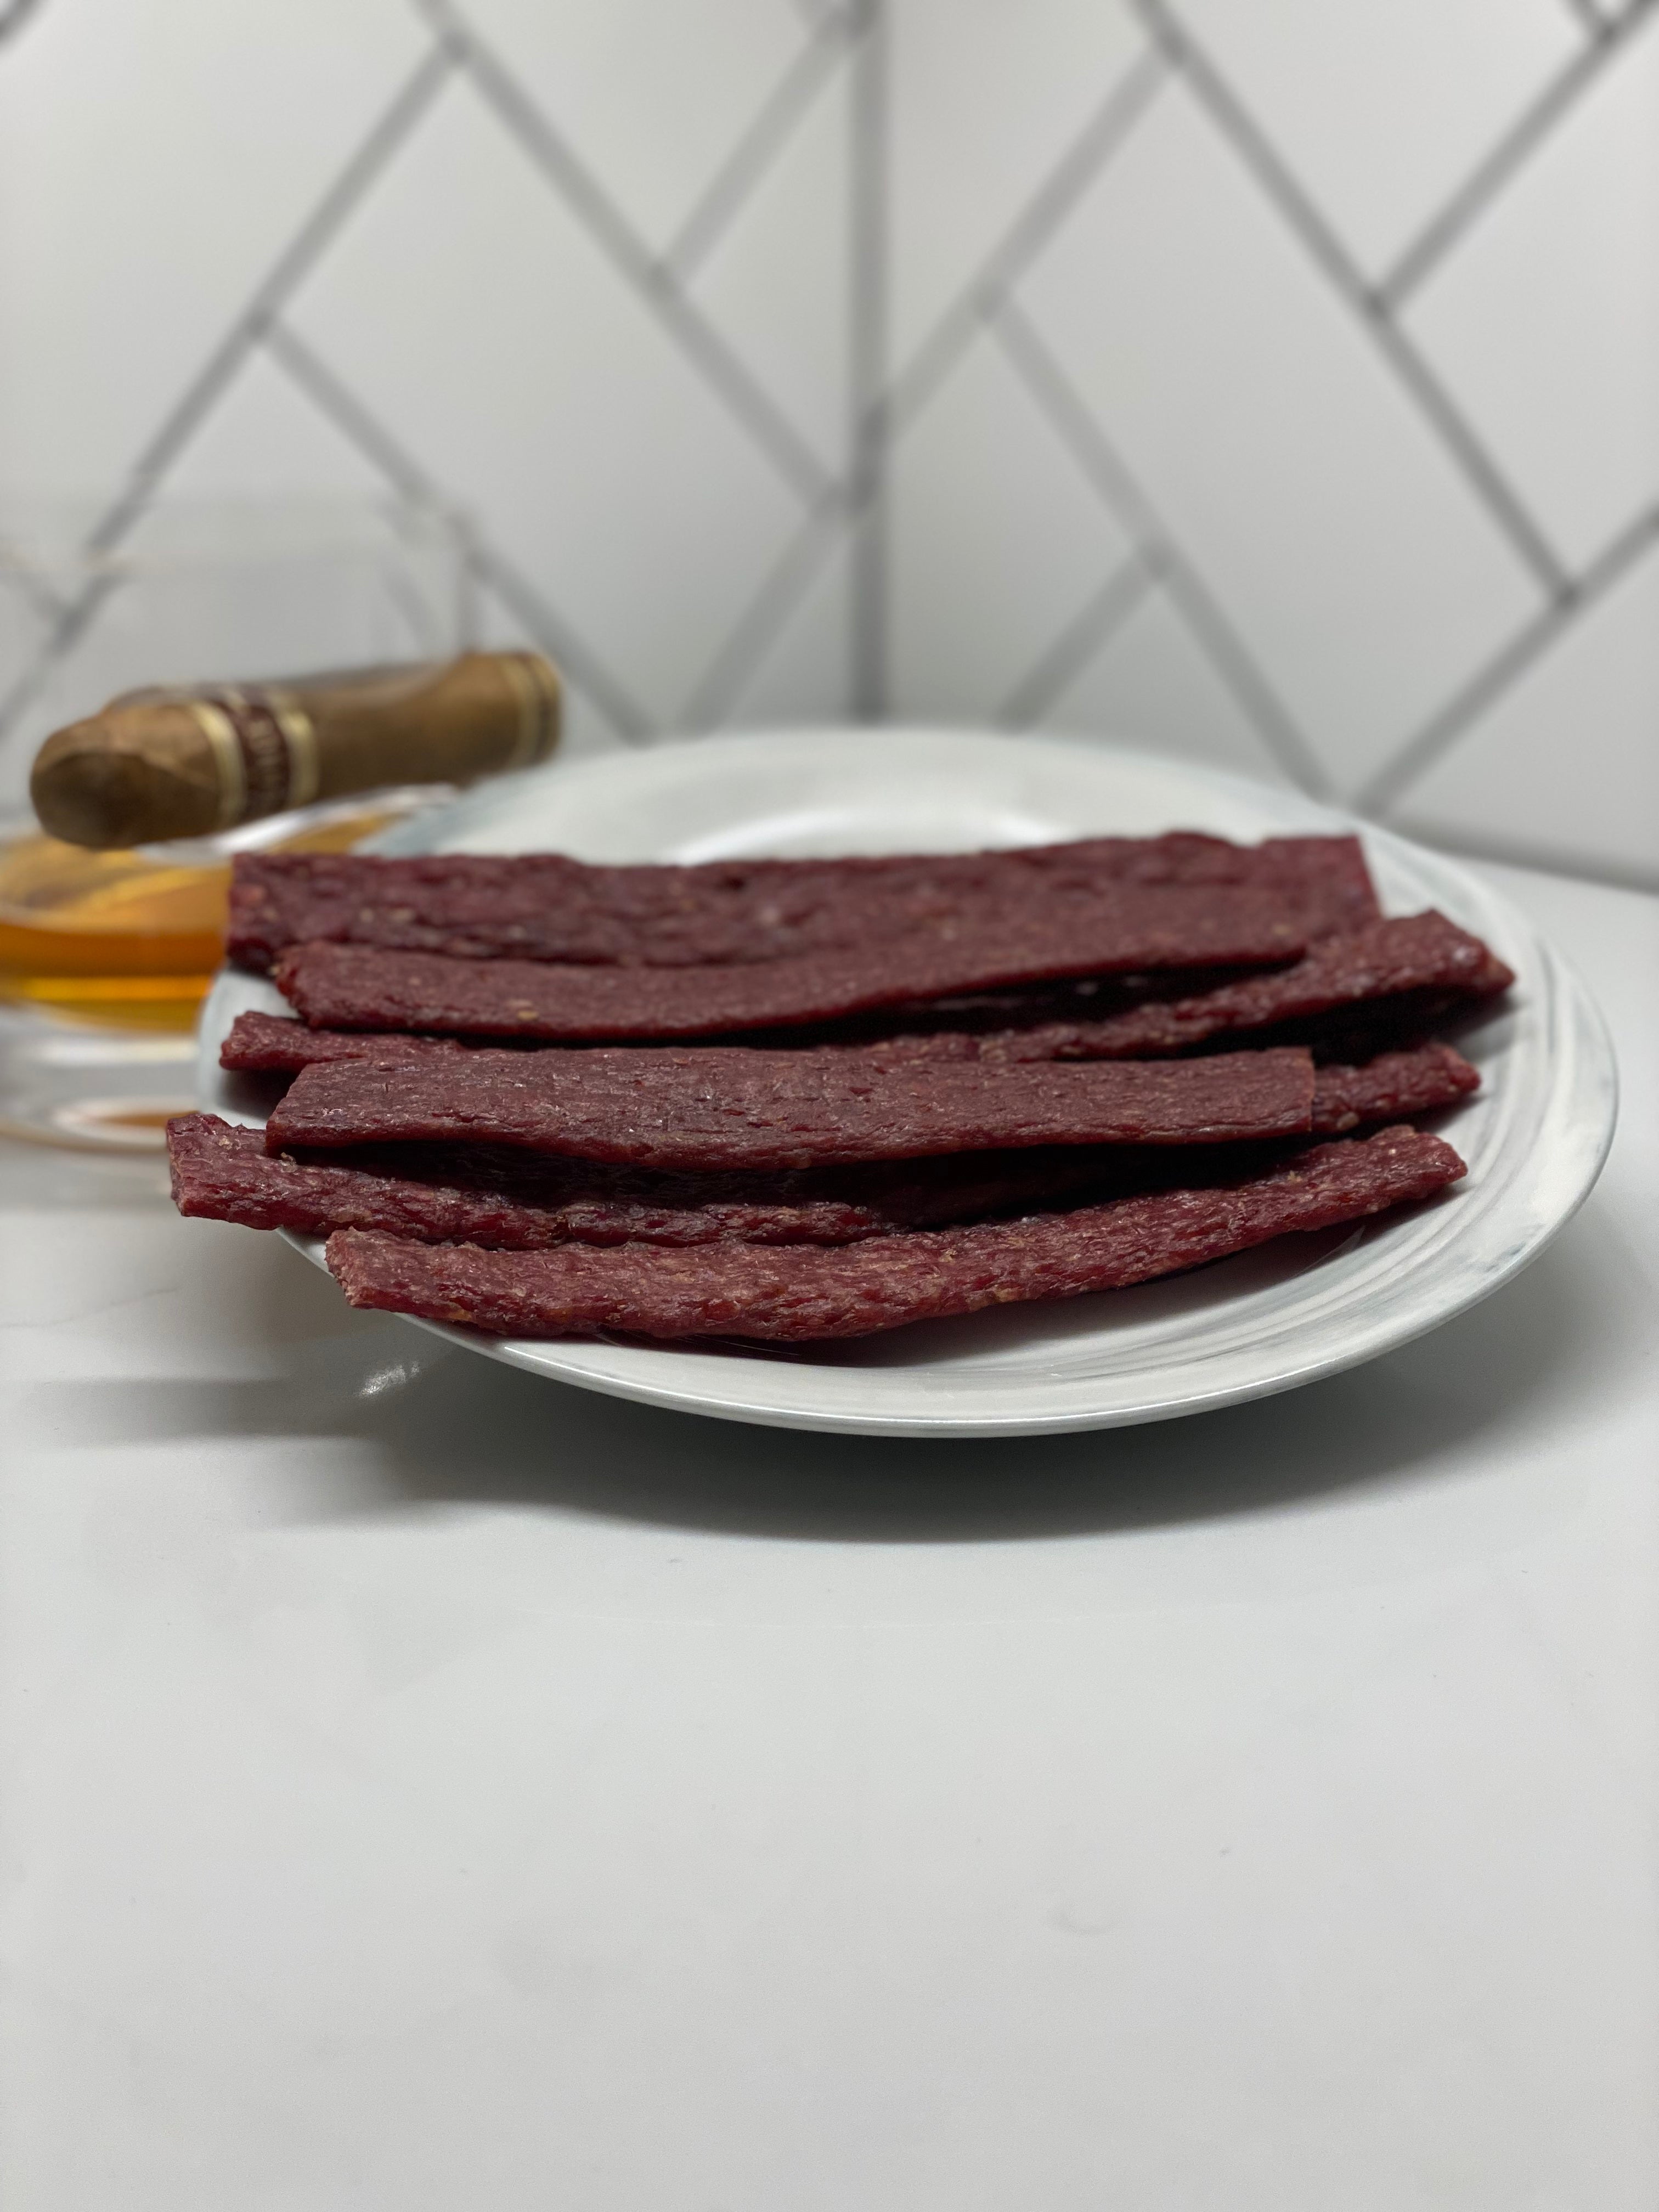 stevie g's beef jerky plated